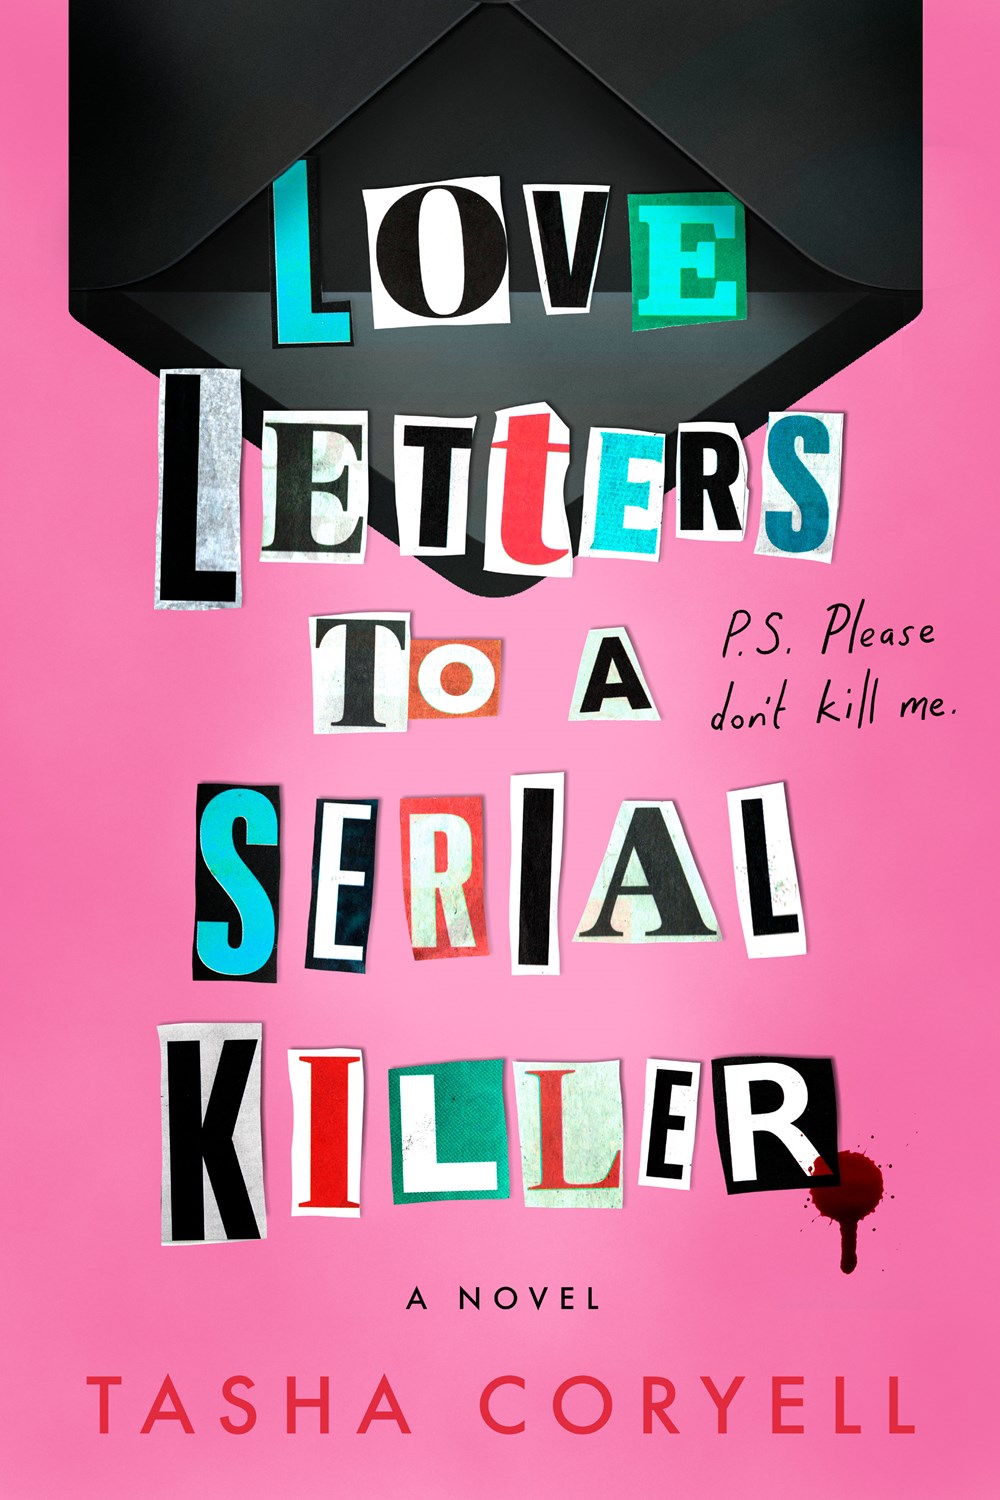 'Love Letters to a Serial Killer' by Tasha Coryell | Mystery Debut of the Month